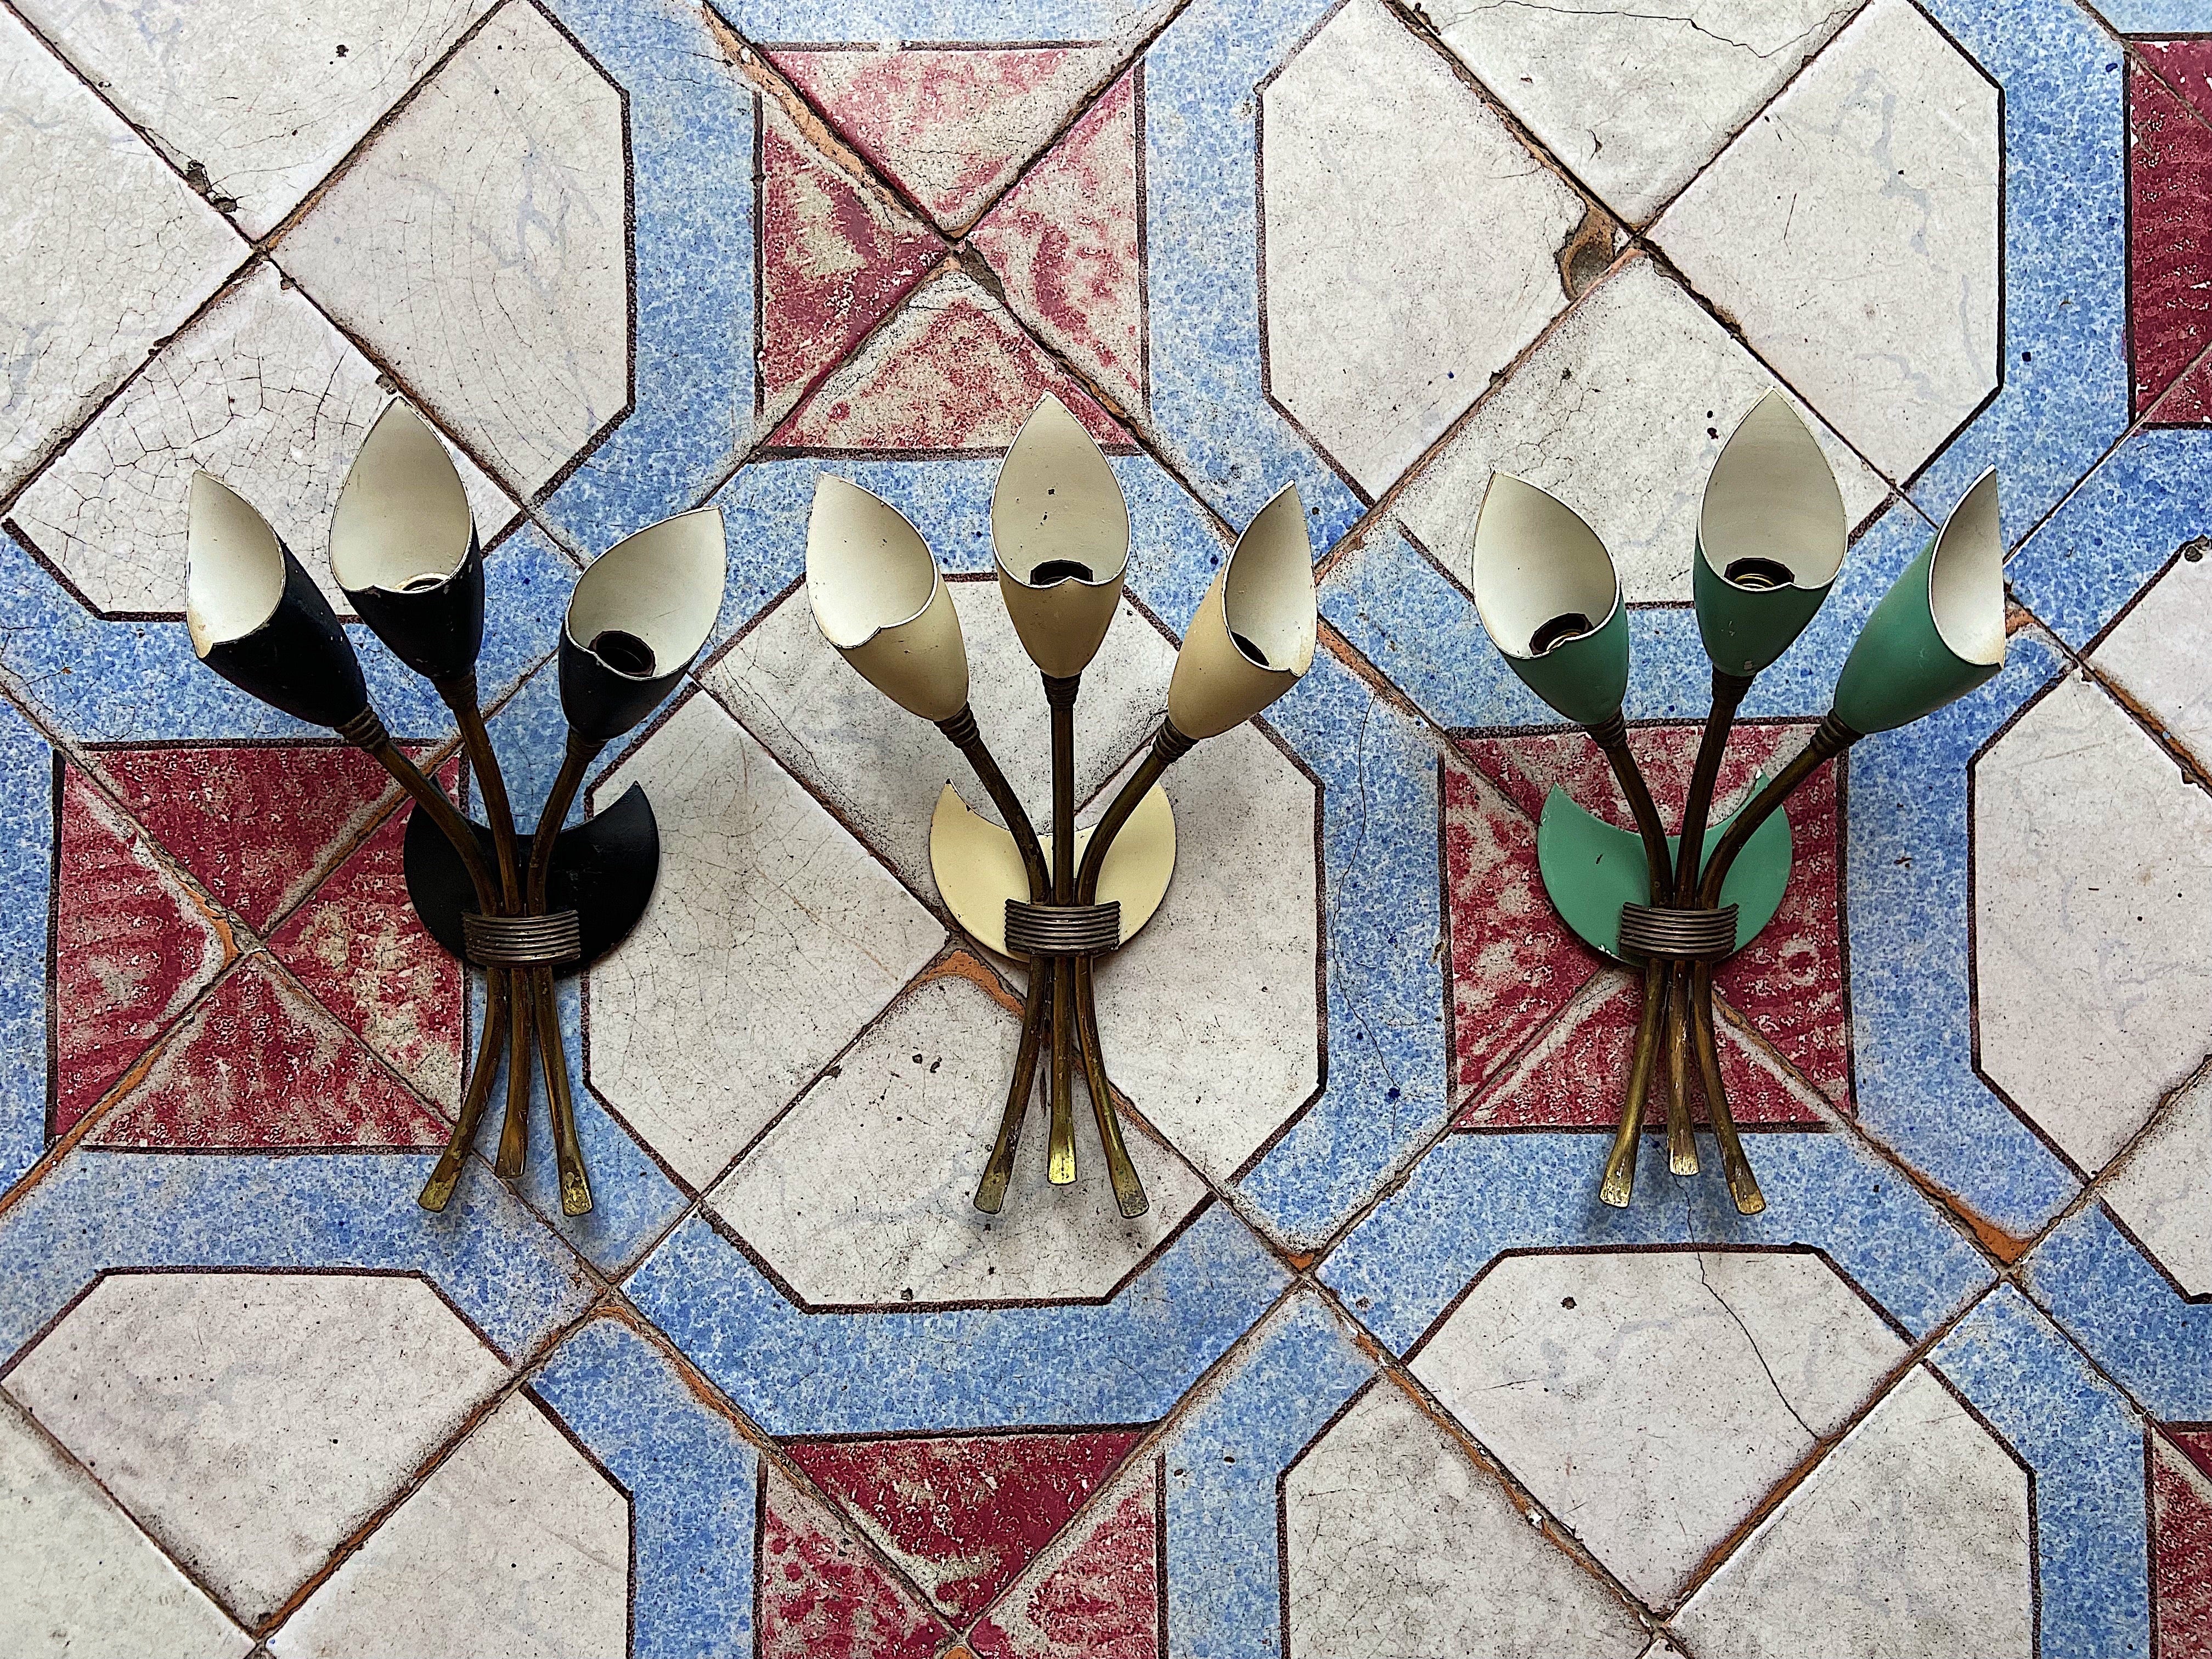 Set of three 1950s Italian wall sconces. Brass and green/black/vanilla painted aluminium. Attributed to Stilnovo. Height: 30cm. Shows patina. At some parts the color coating has come off or scratched. Nothing that ruins the overall impression of